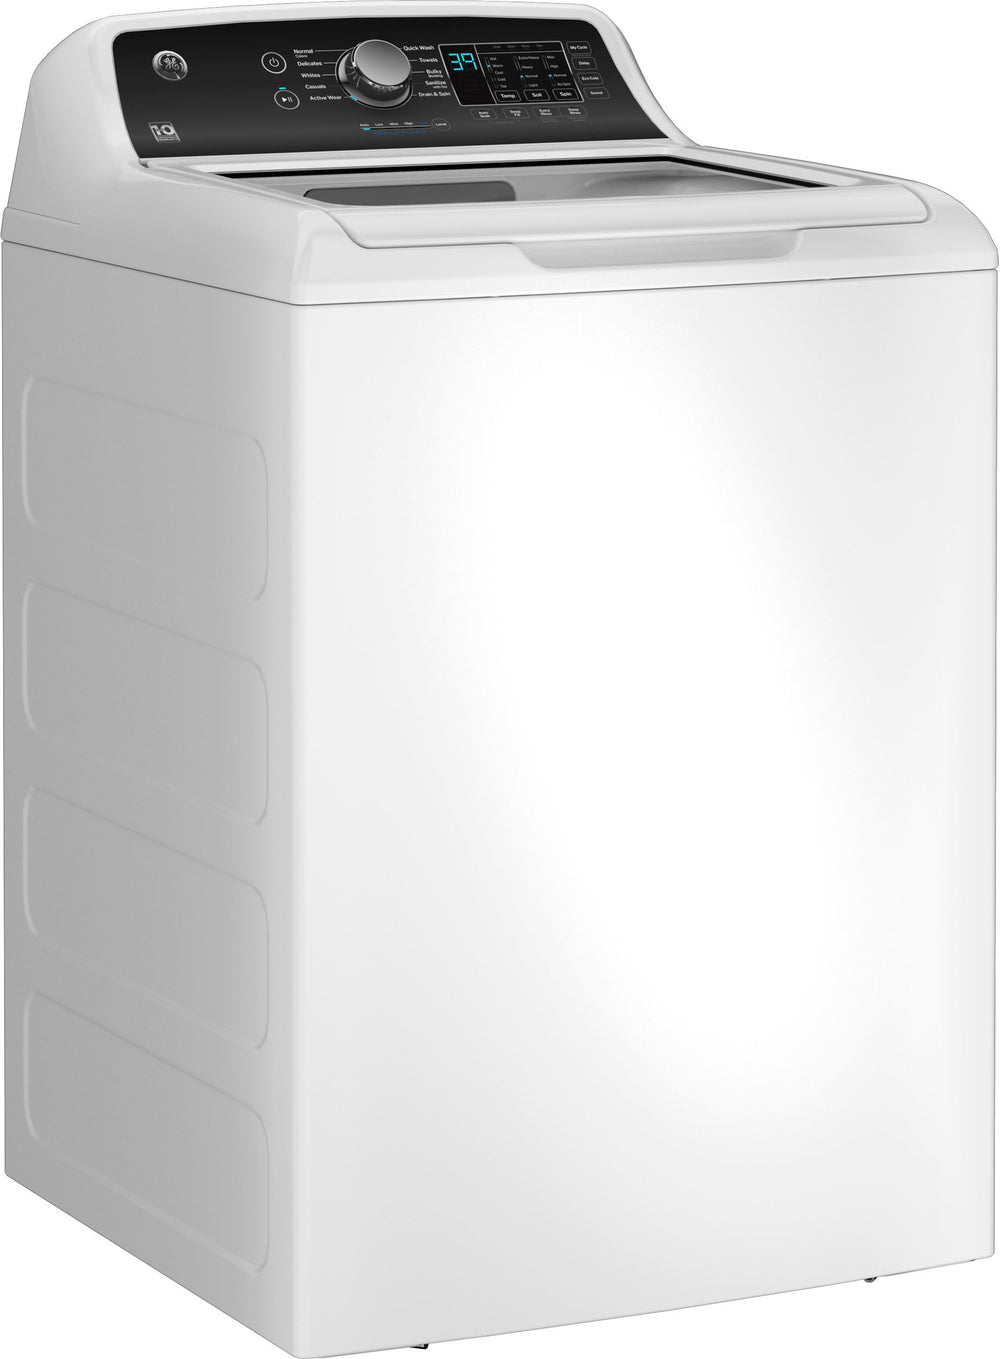 GE - 4.5 cu ft Top Load Washer with Water Level Control, Deep Fill, Quick Wash, and Glass Lid - White on White_1